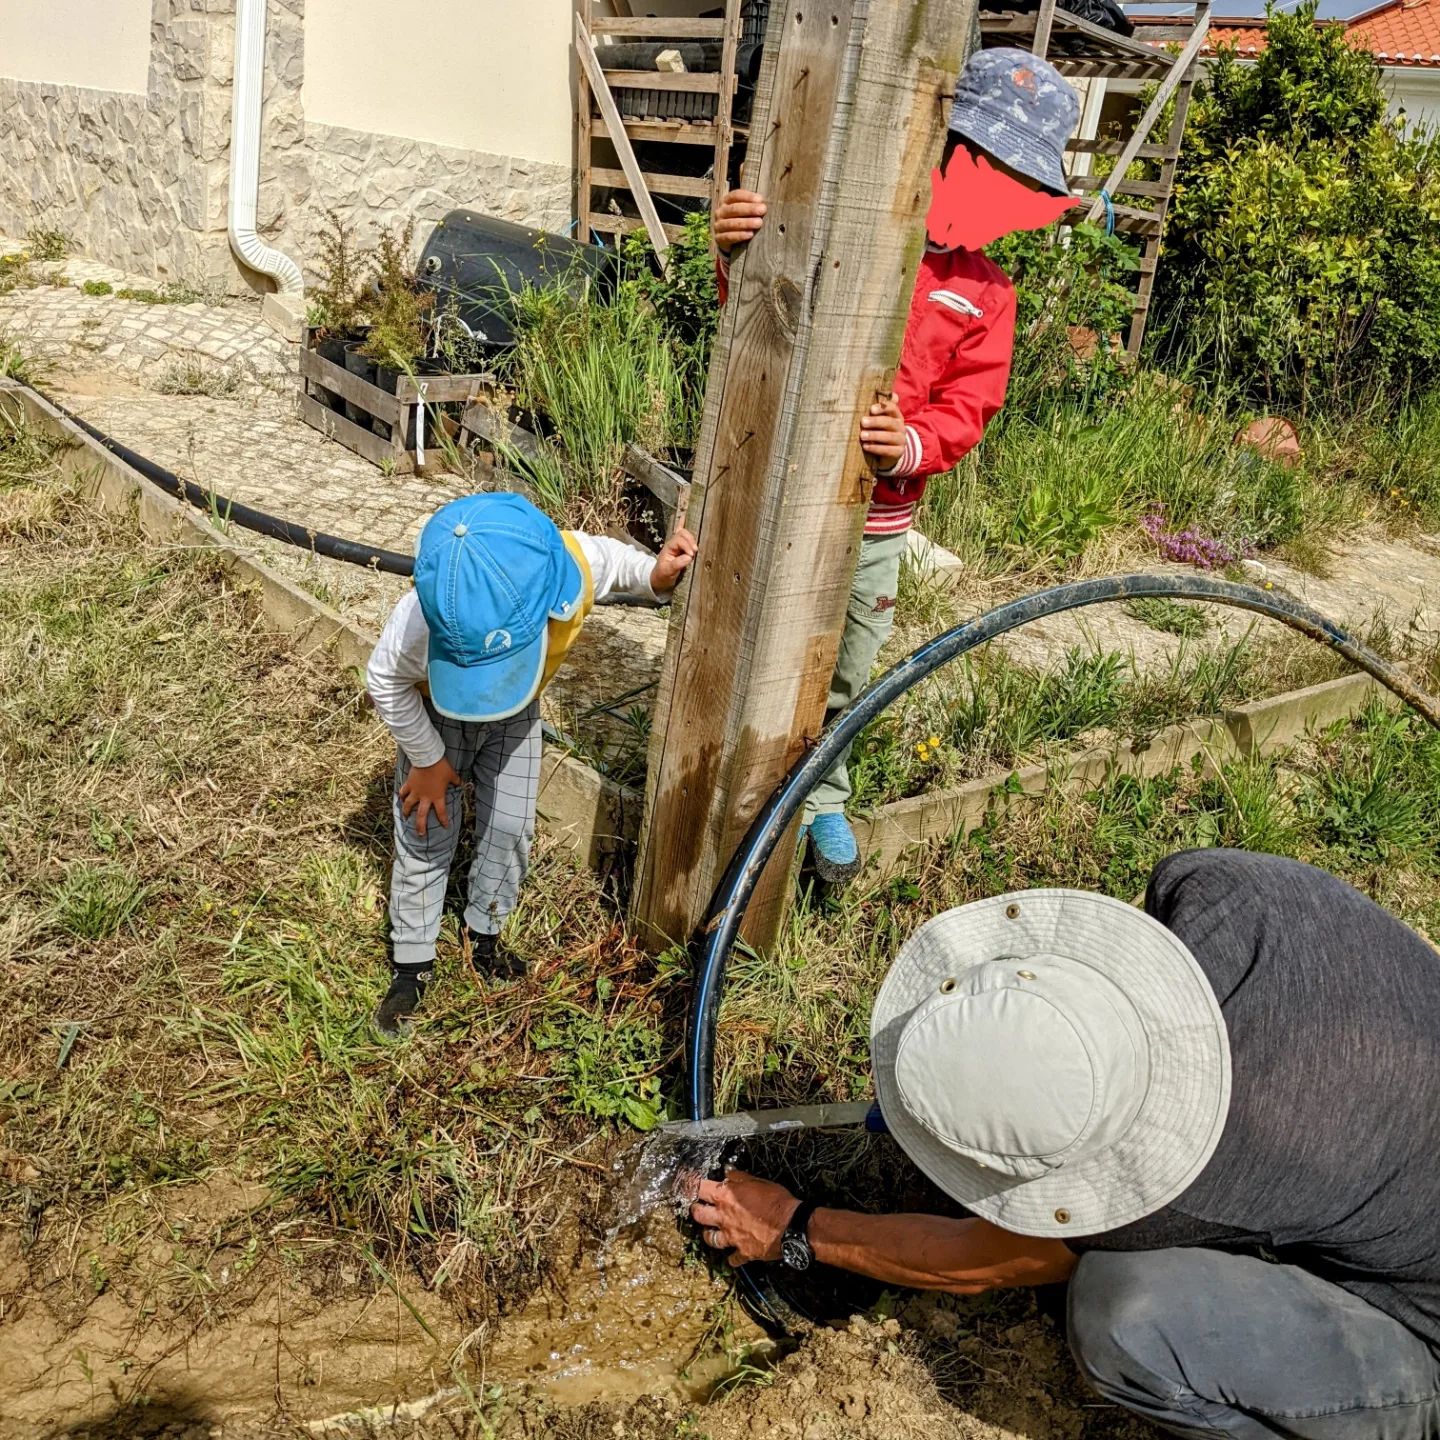 Point of no return: cutting the old #irrigation mainline to hook up the new one